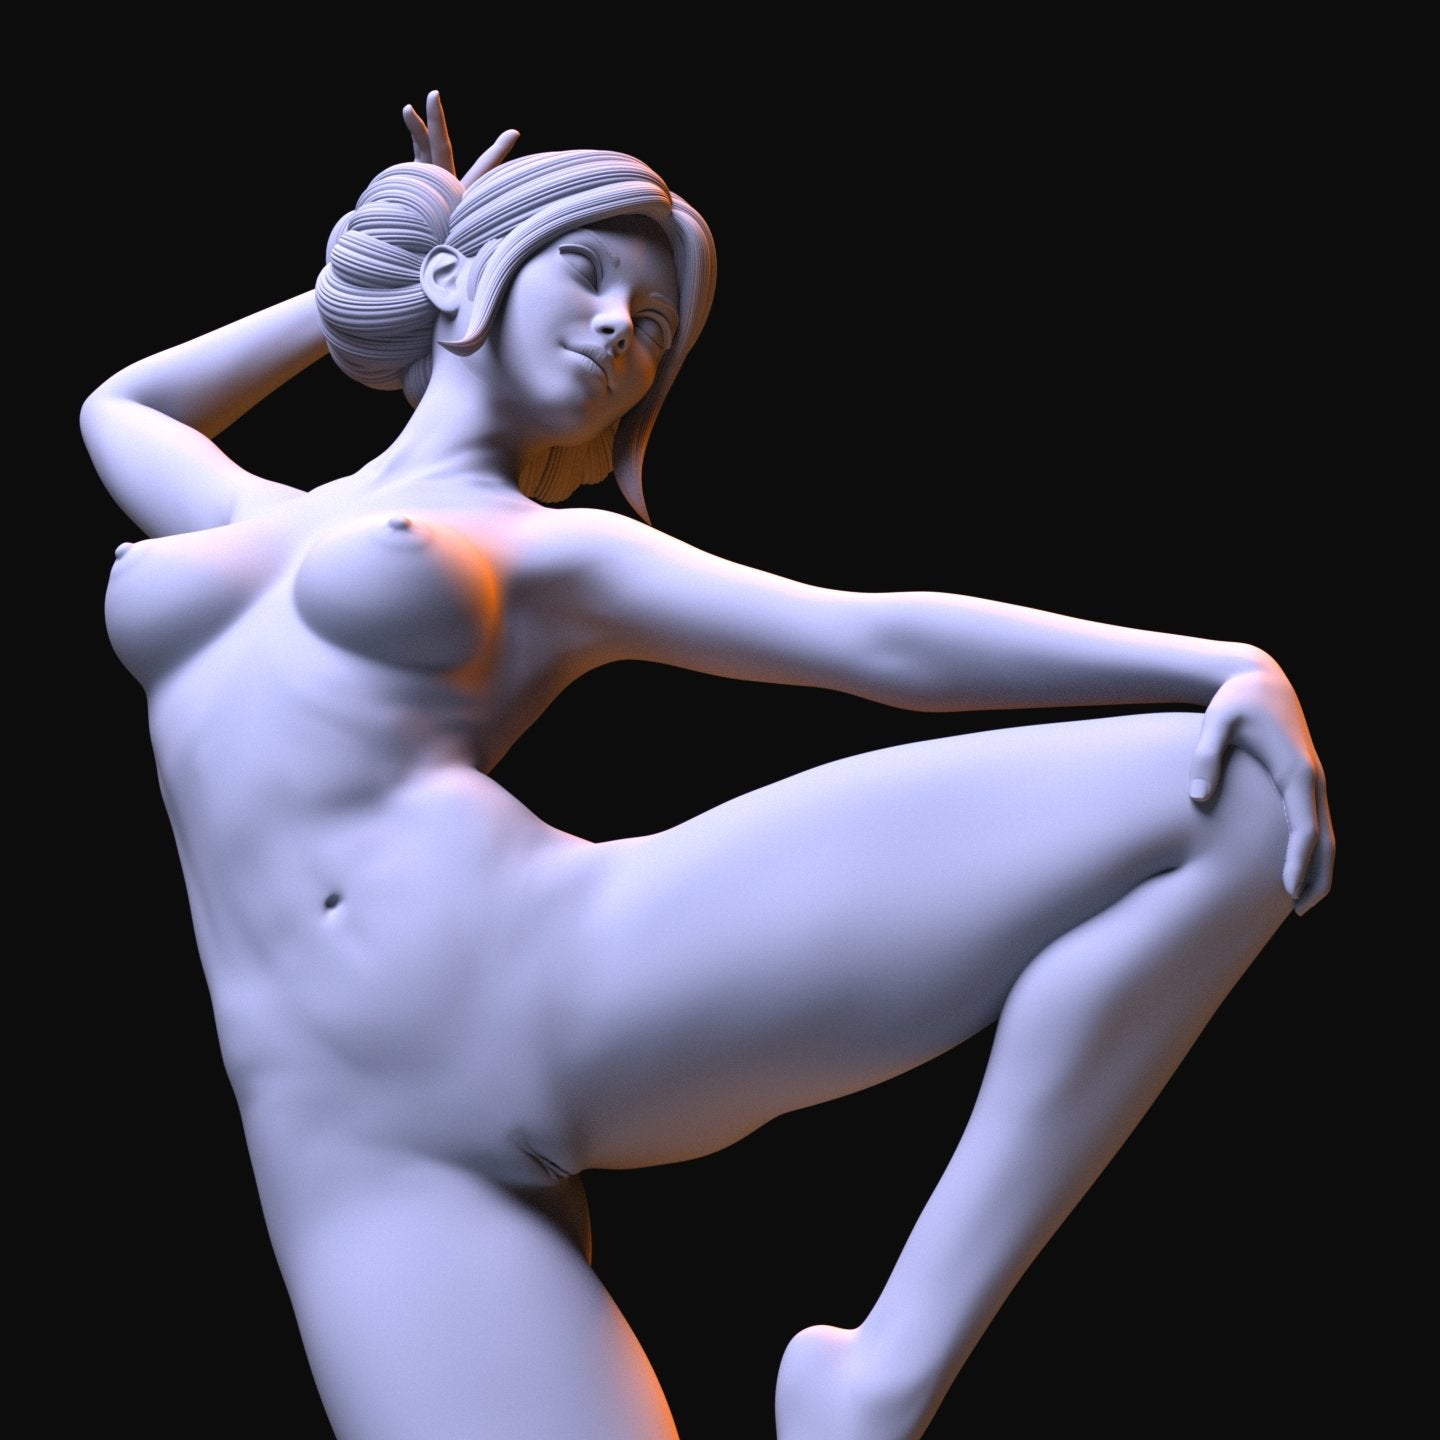 Naked Woman Art NSFW 3D Printed Figurine Fanart Unpainted Miniature Collectibles